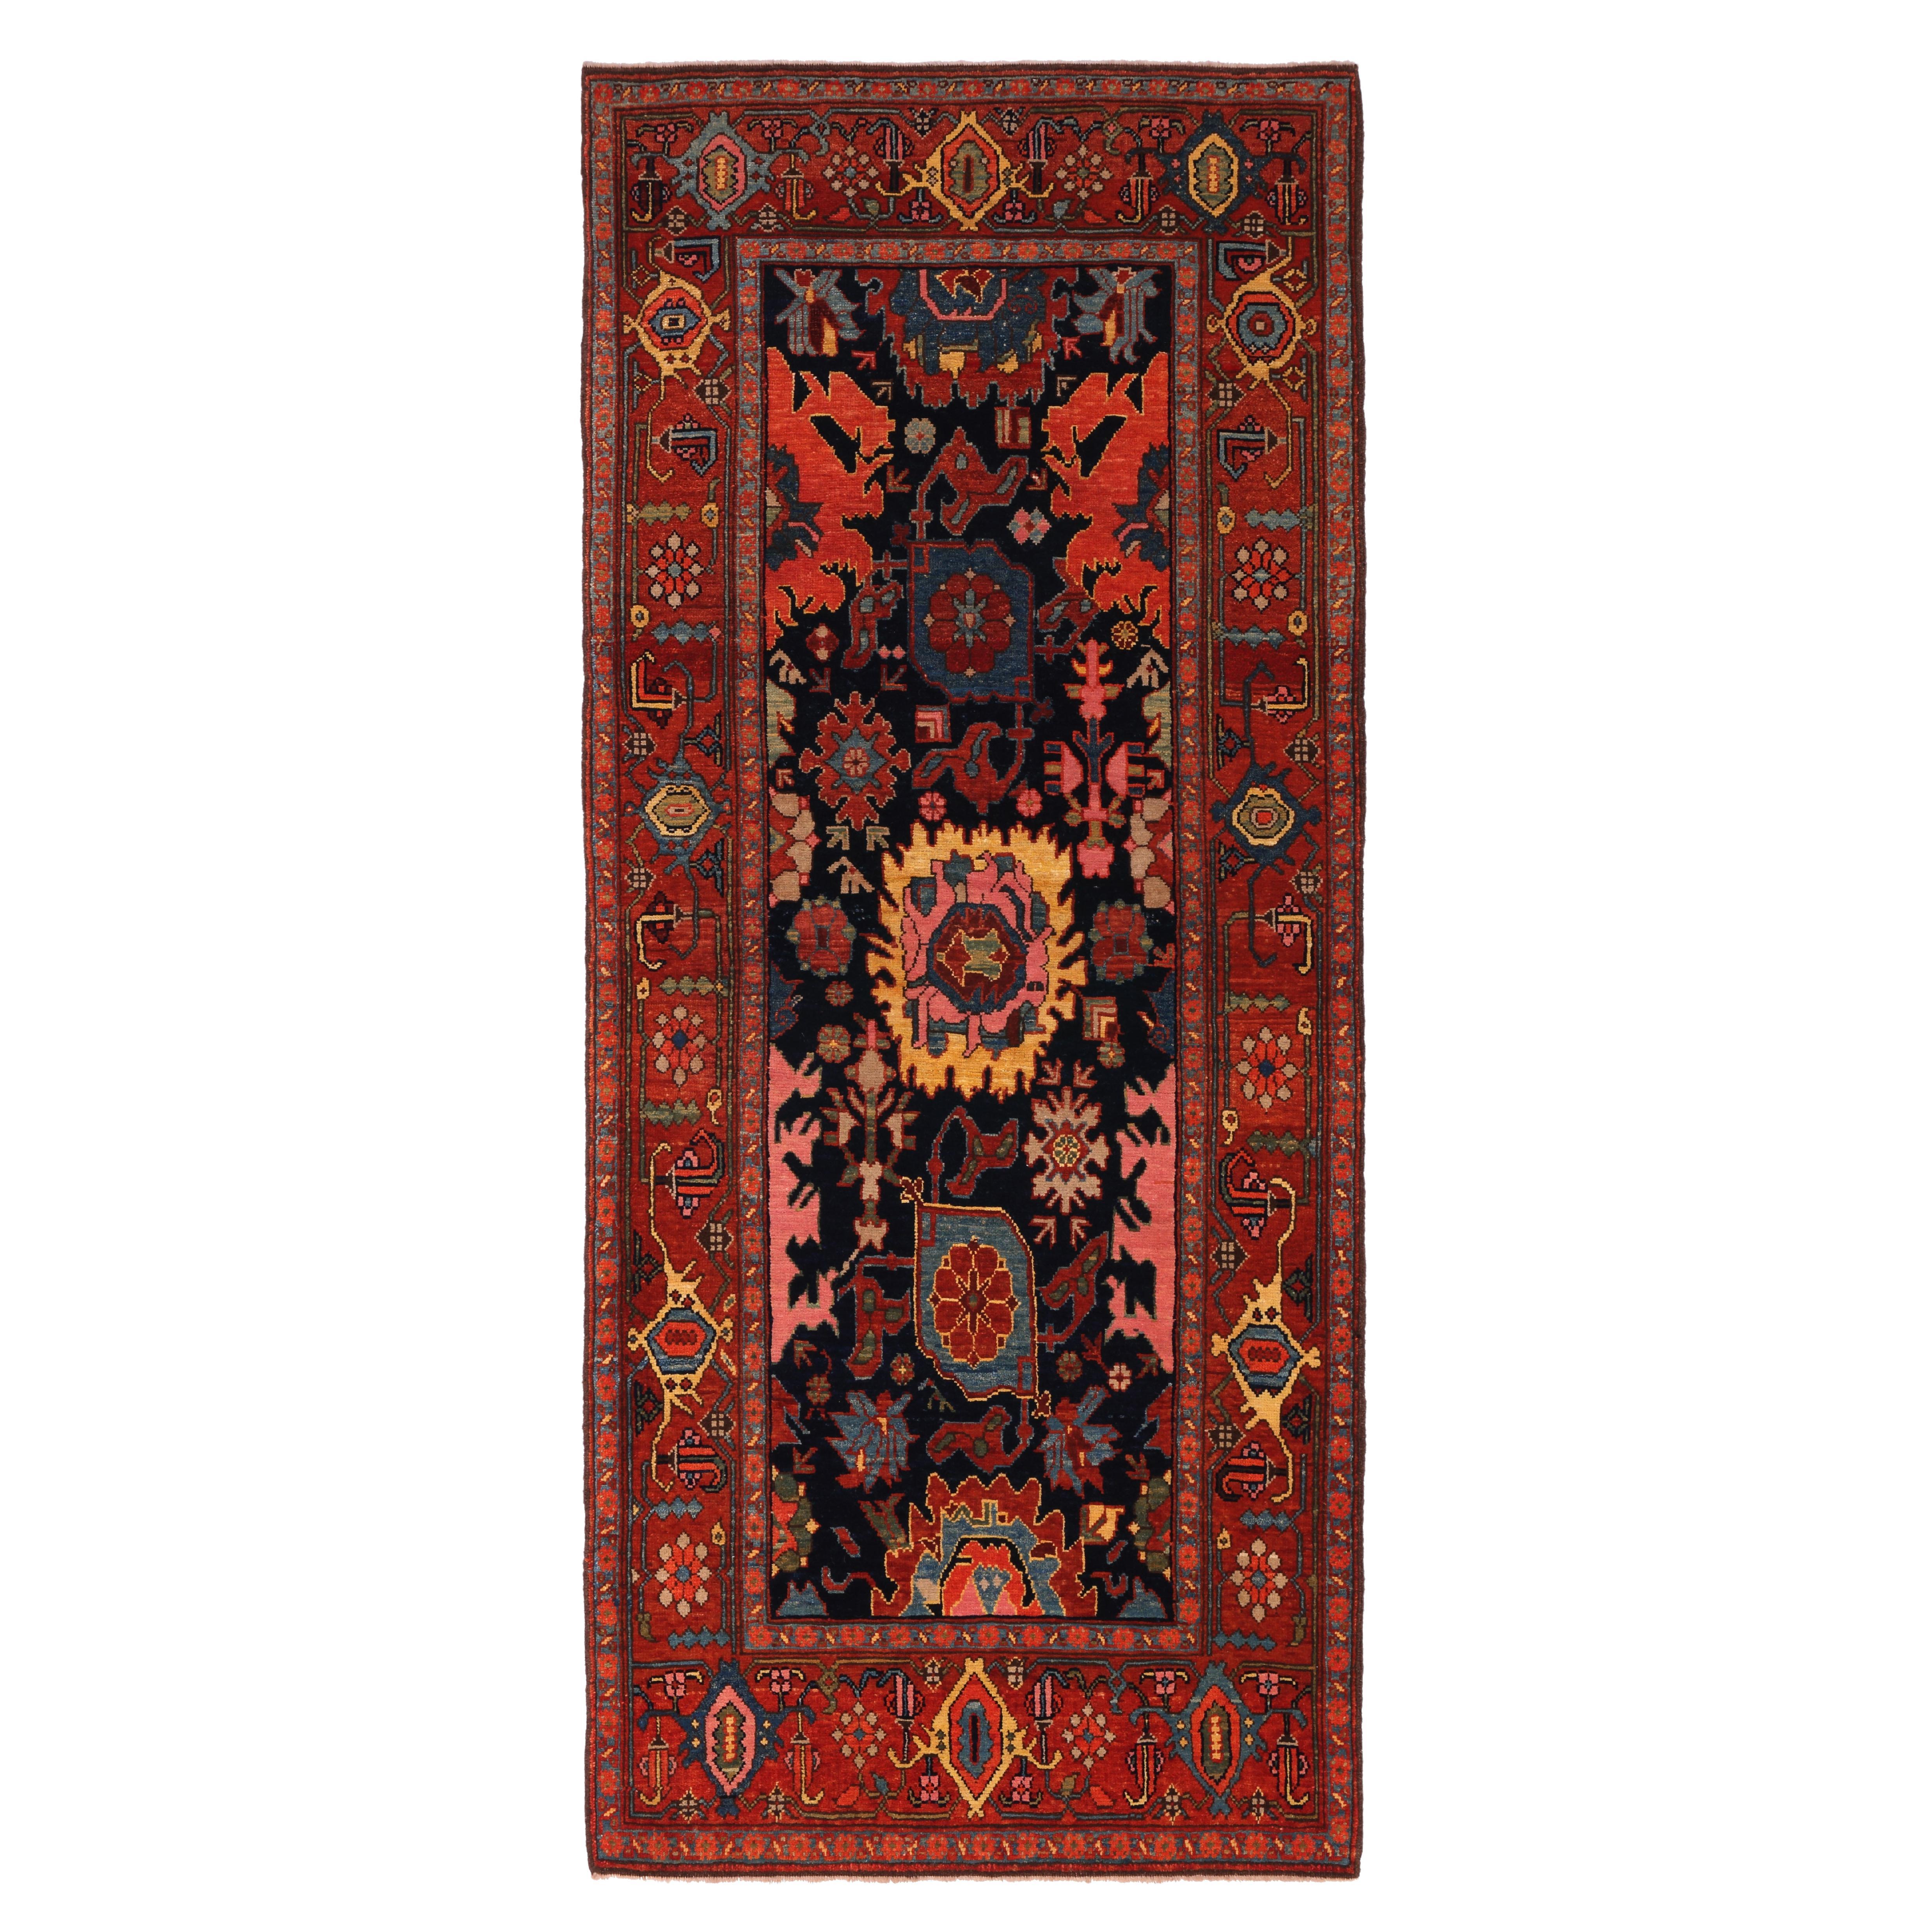 Ararat Rugs Palmettes and Flowers Lattice Rug Revival Carpet, Natural Dyed For Sale